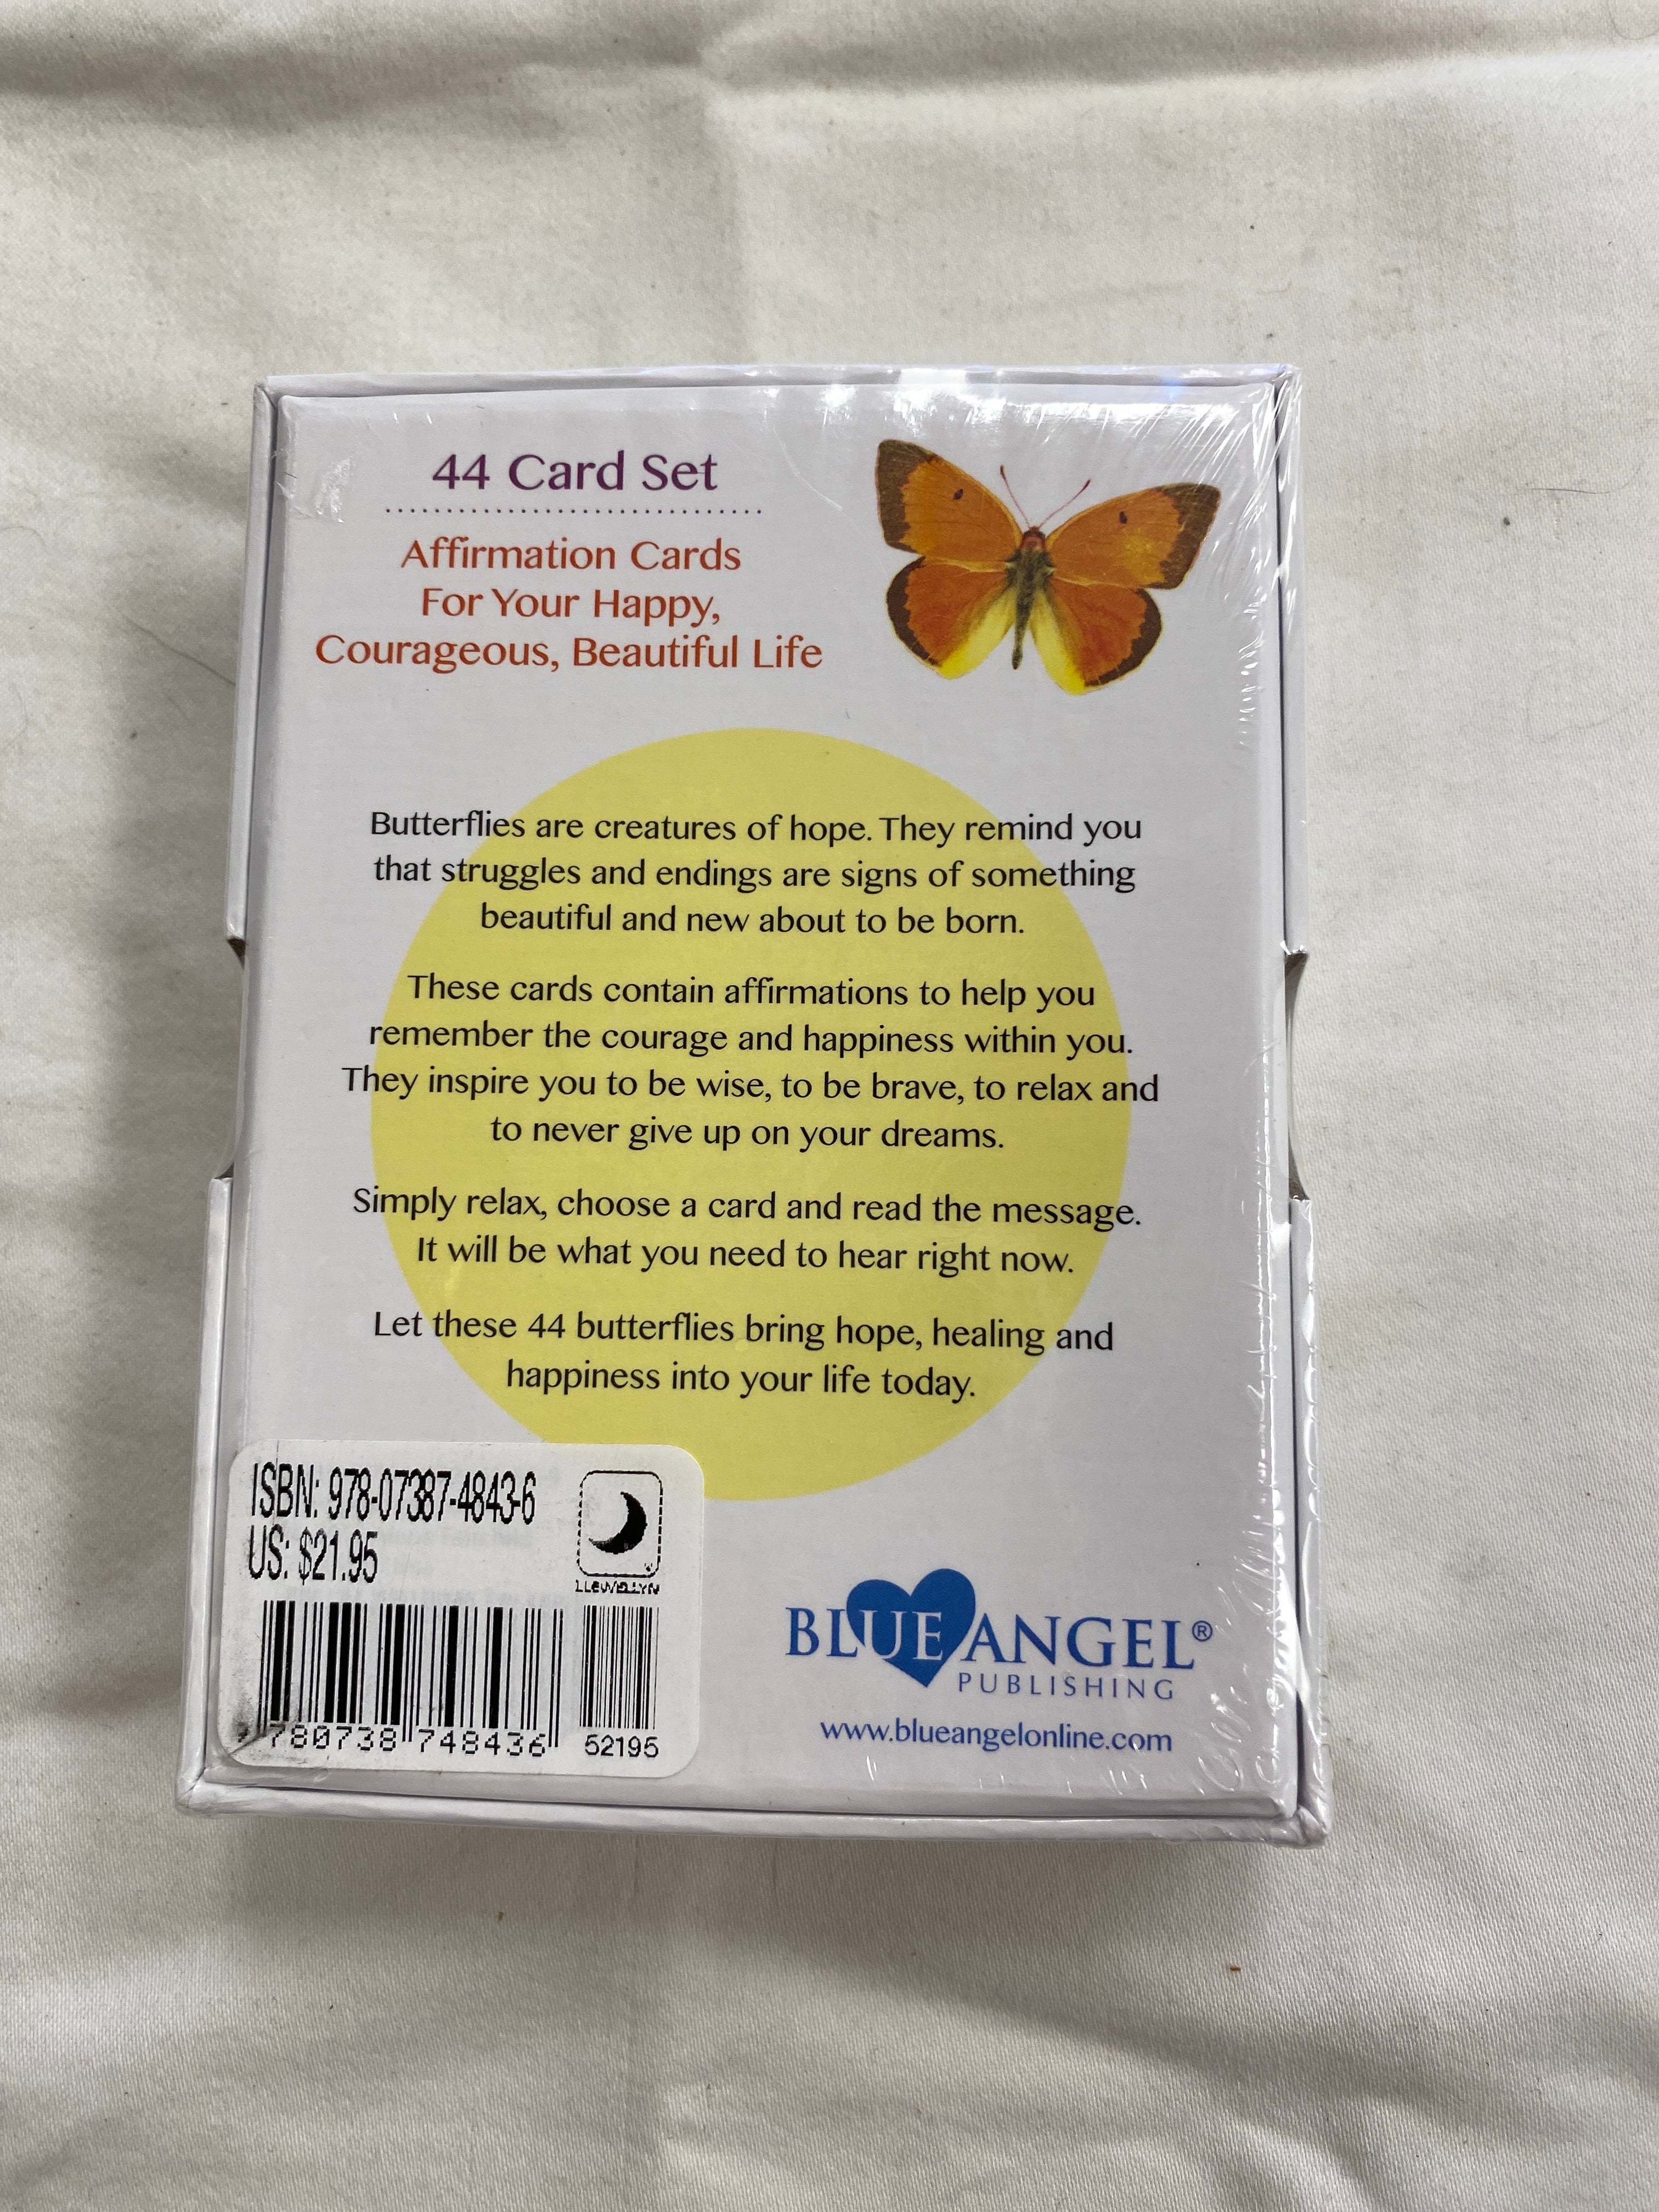 Butterfly Affirmations Oracle Deck